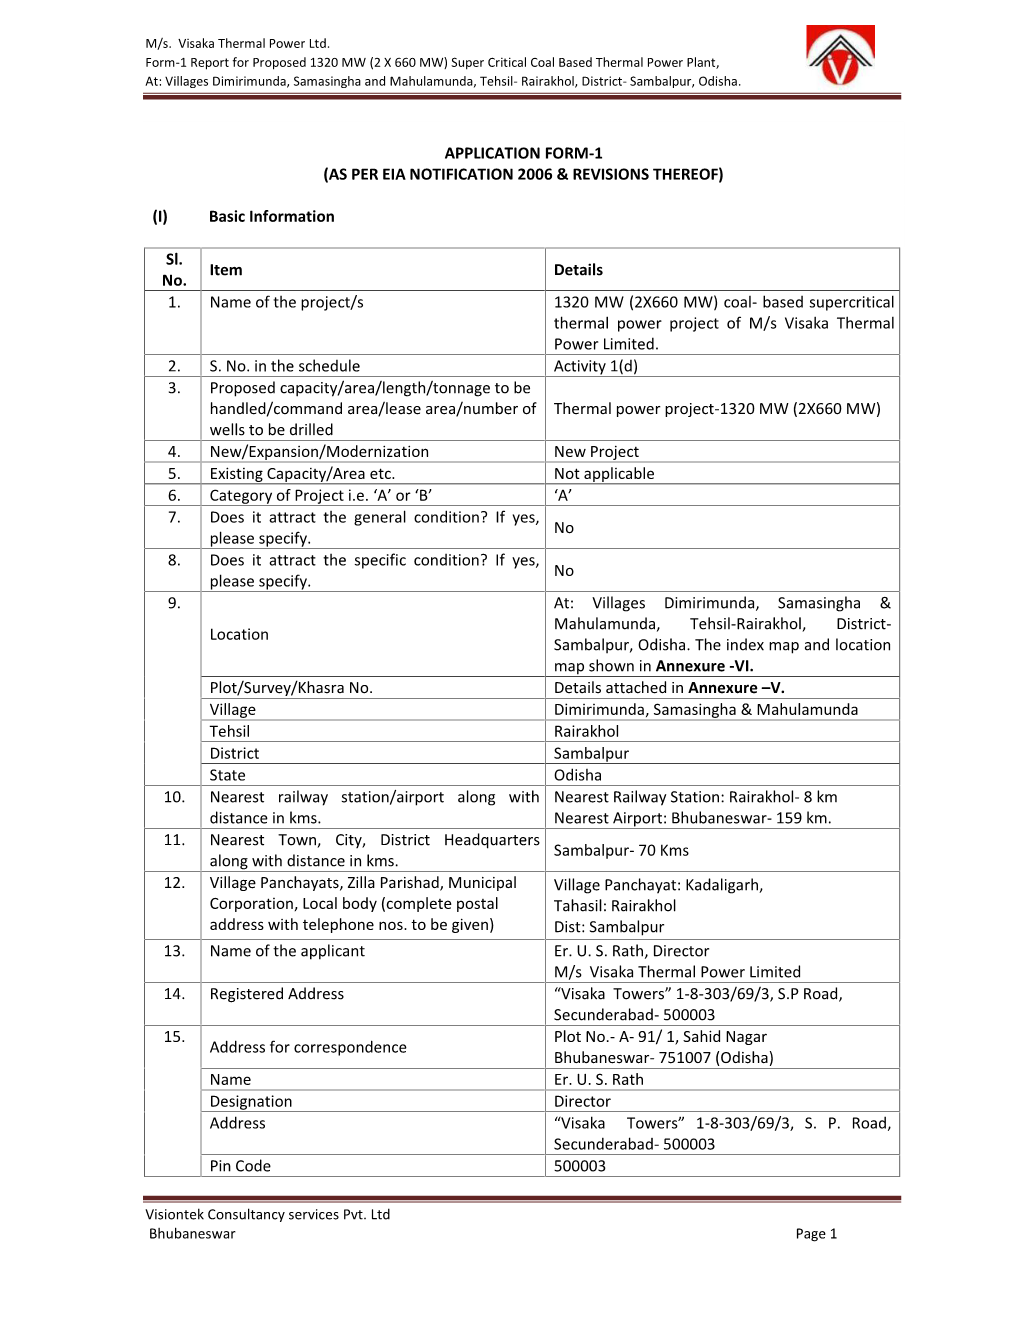 Application Form-1 (As Per Eia Notification 2006 & Revisions Thereof)